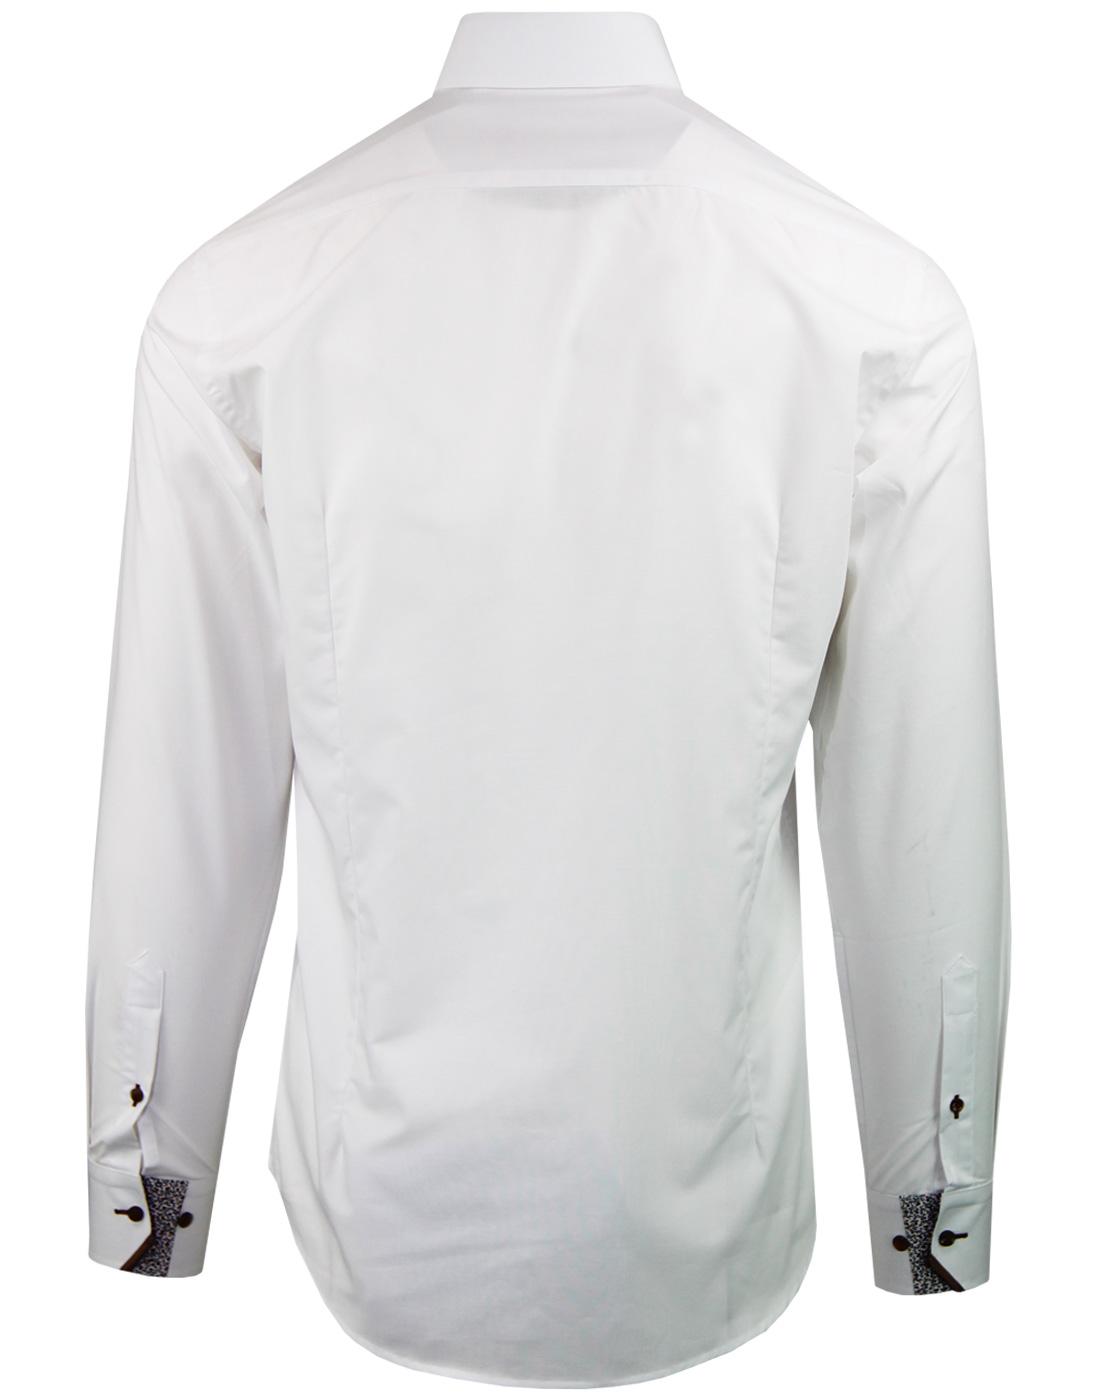 GUIDE LONDON Retro Mod Tipped Collar Smart Shirt in White